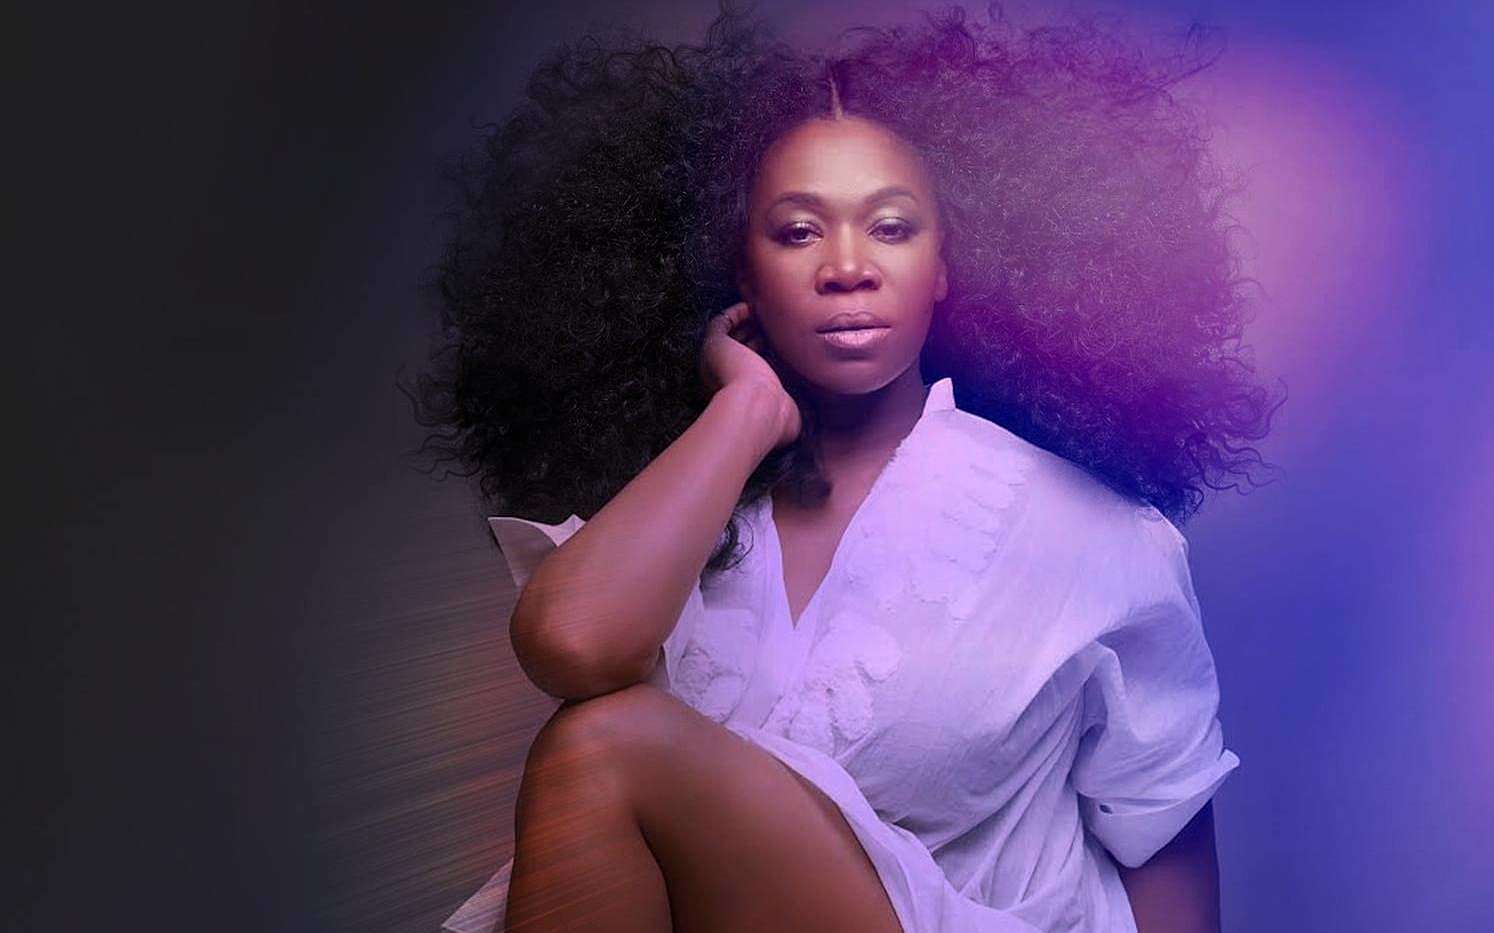 India Arie Biography: Husband, Songs, Age, Albums, Net Worth, Website, Parents, Family